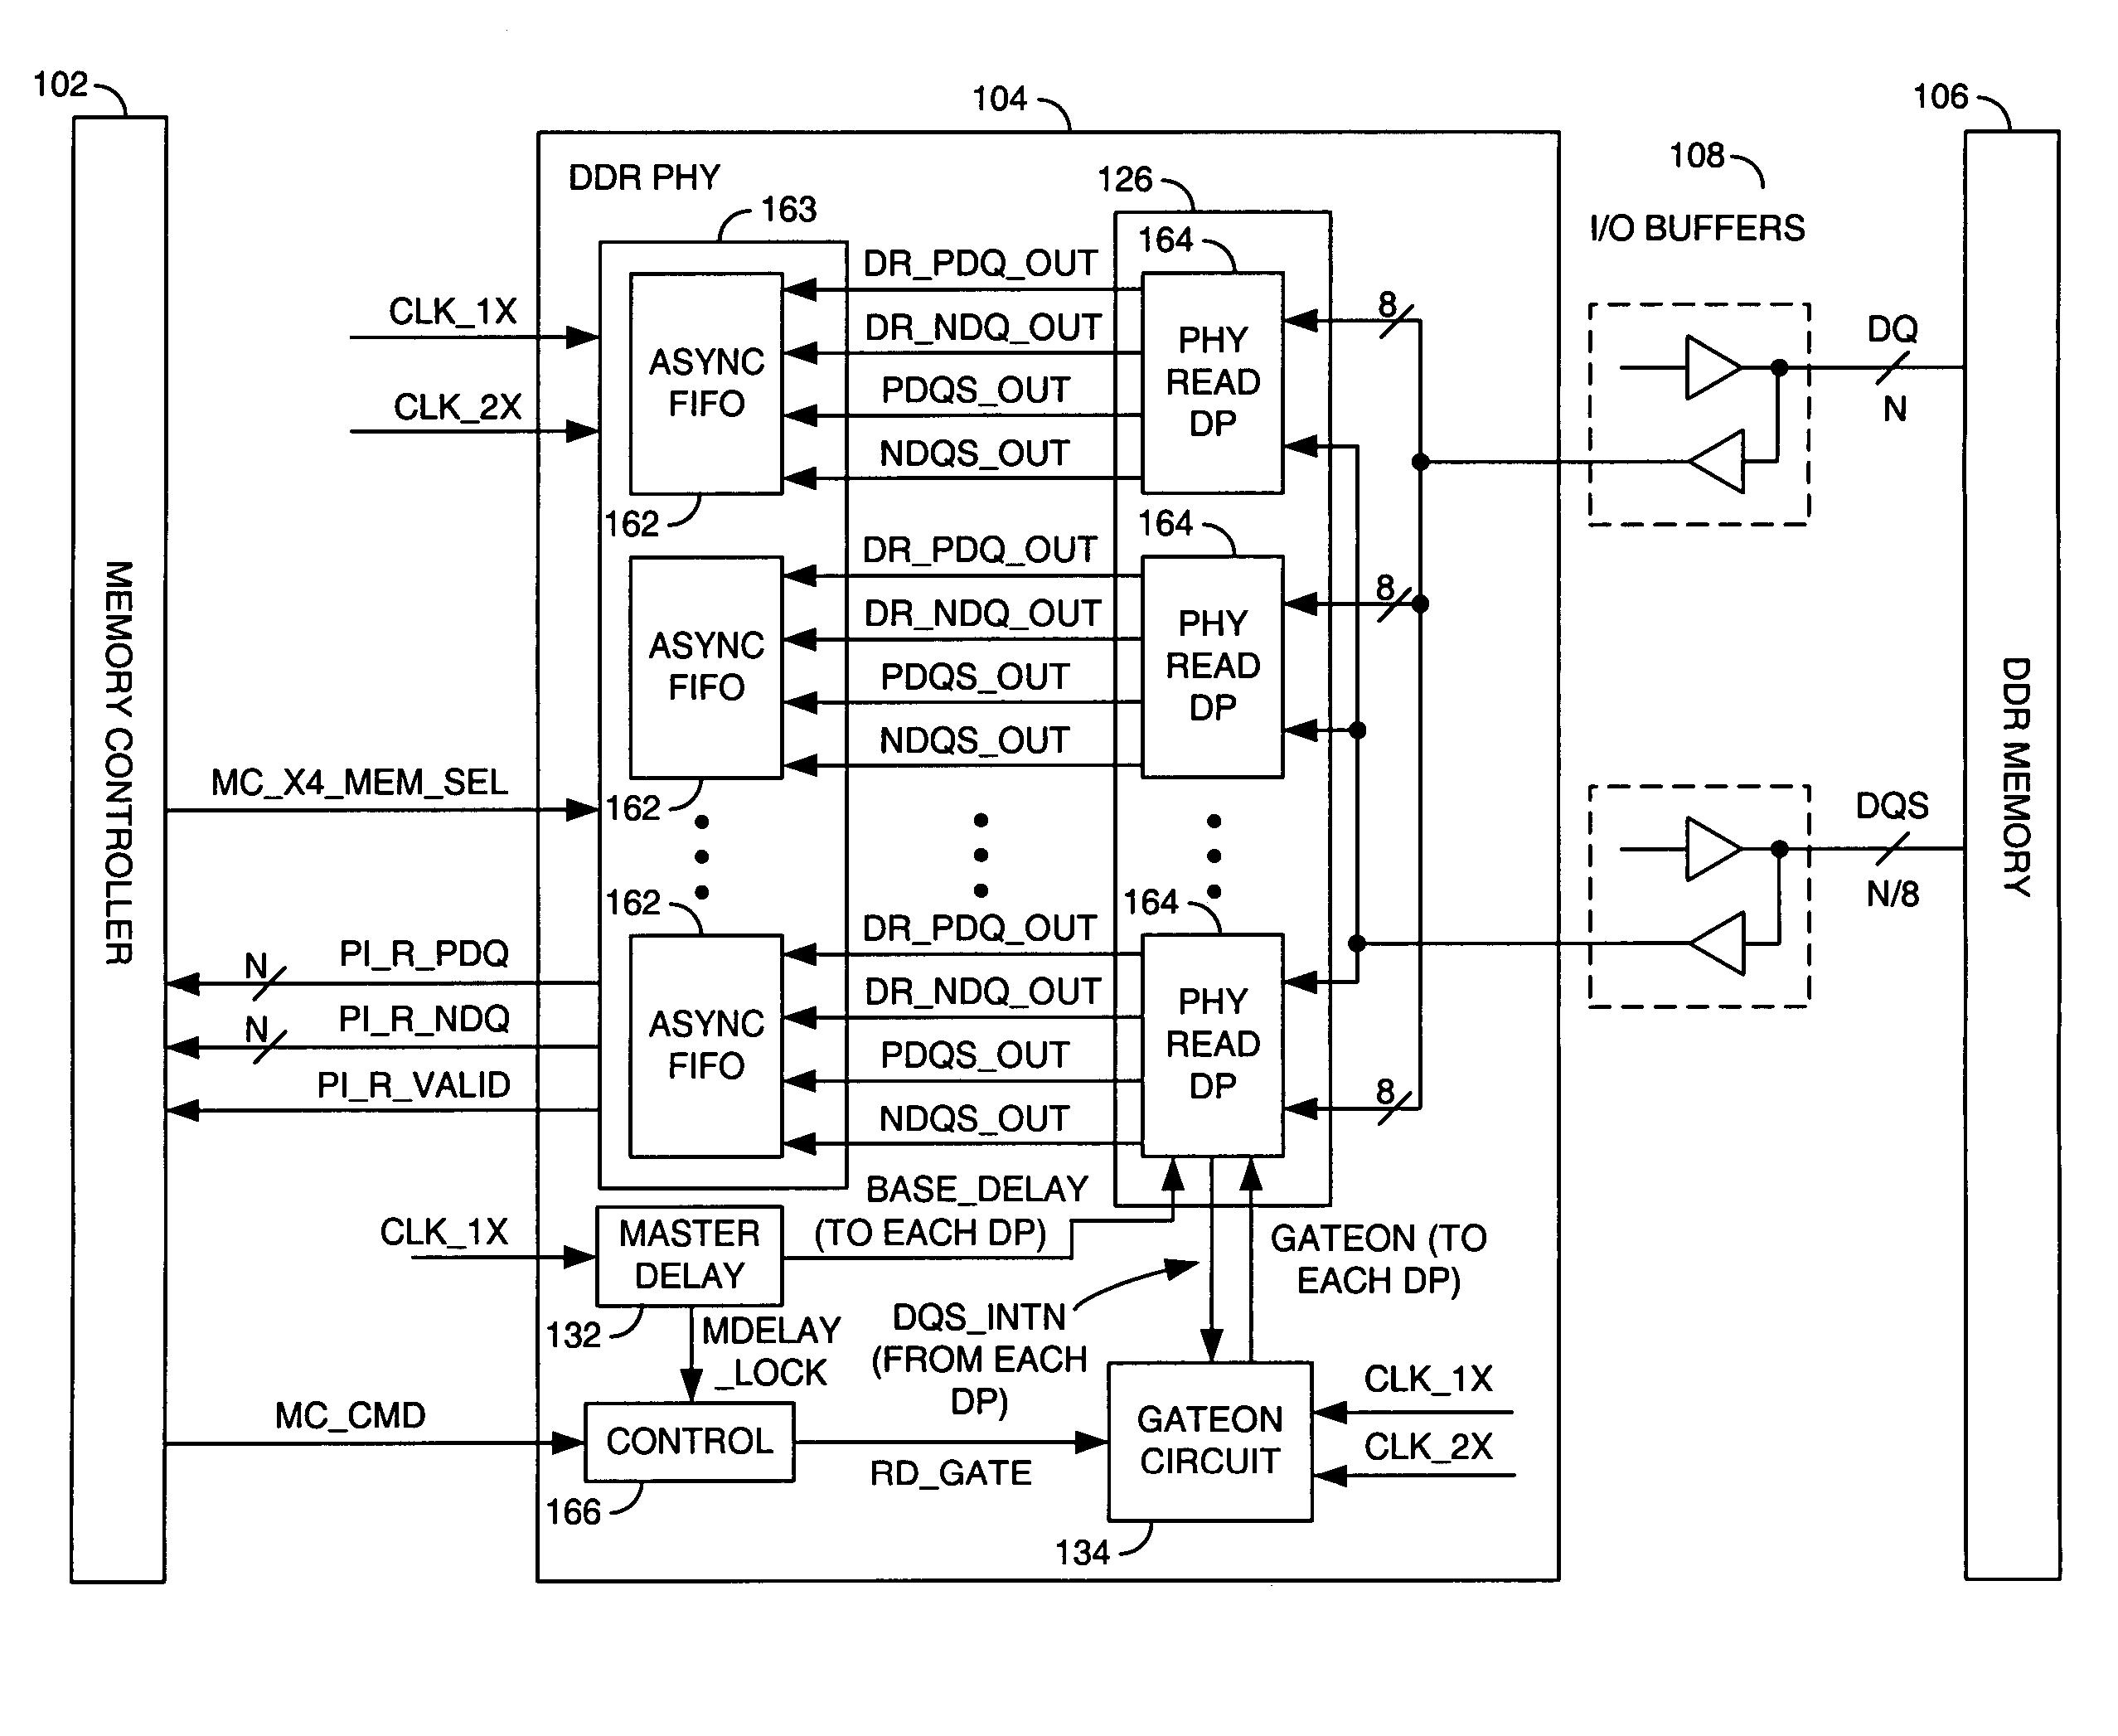 Configurable high-speed memory interface subsystem